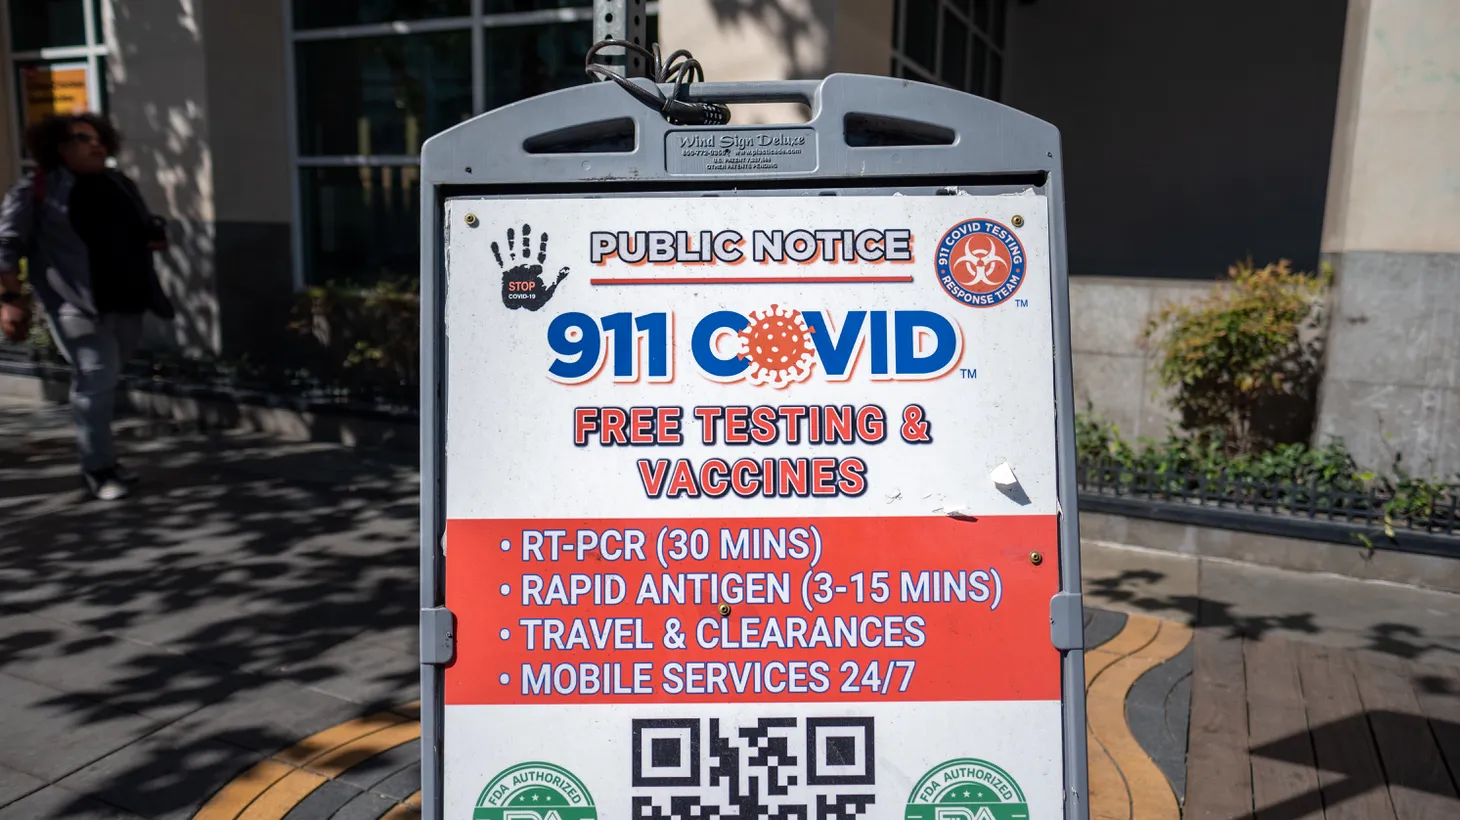 A public notice sign advertises “911 COVID free testing and vaccines” in Santa Monica, CA.